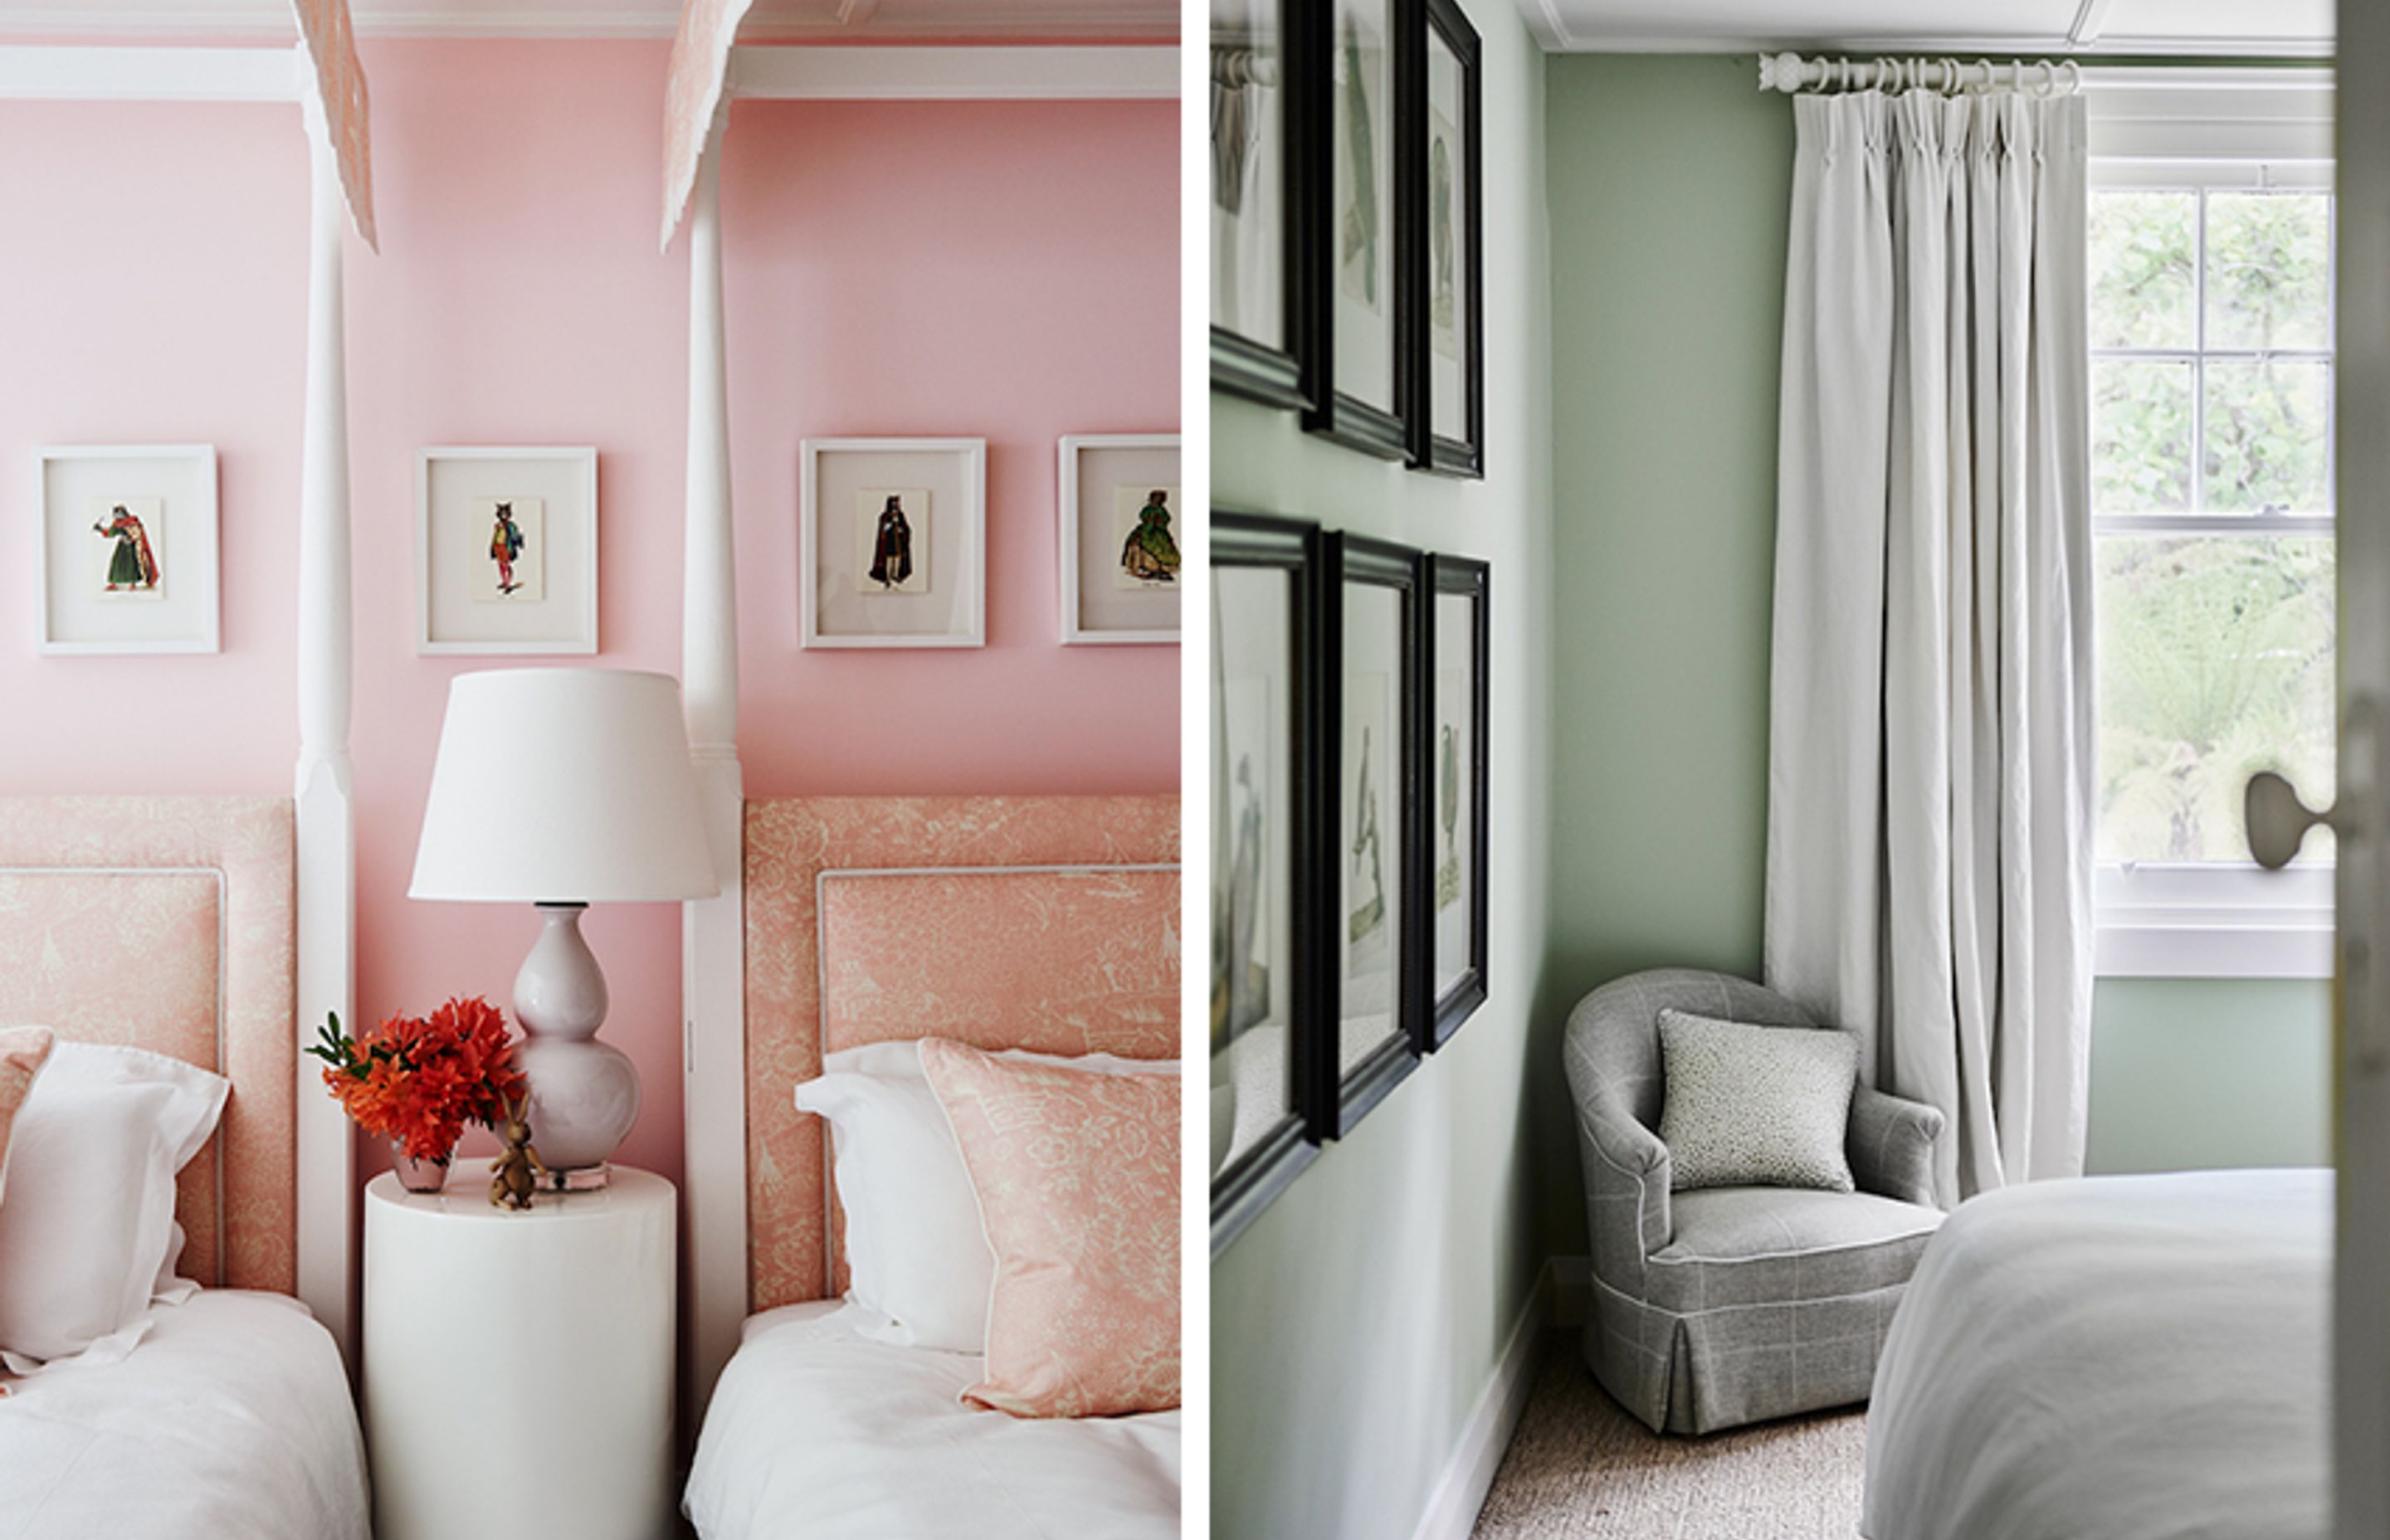 With three daughters in the family, Resene Cosmos was chosen for the girls' bedrooms. In the guest bedroom, Resene Cooled Green was chosen by the designer for a calming, reflective feel.